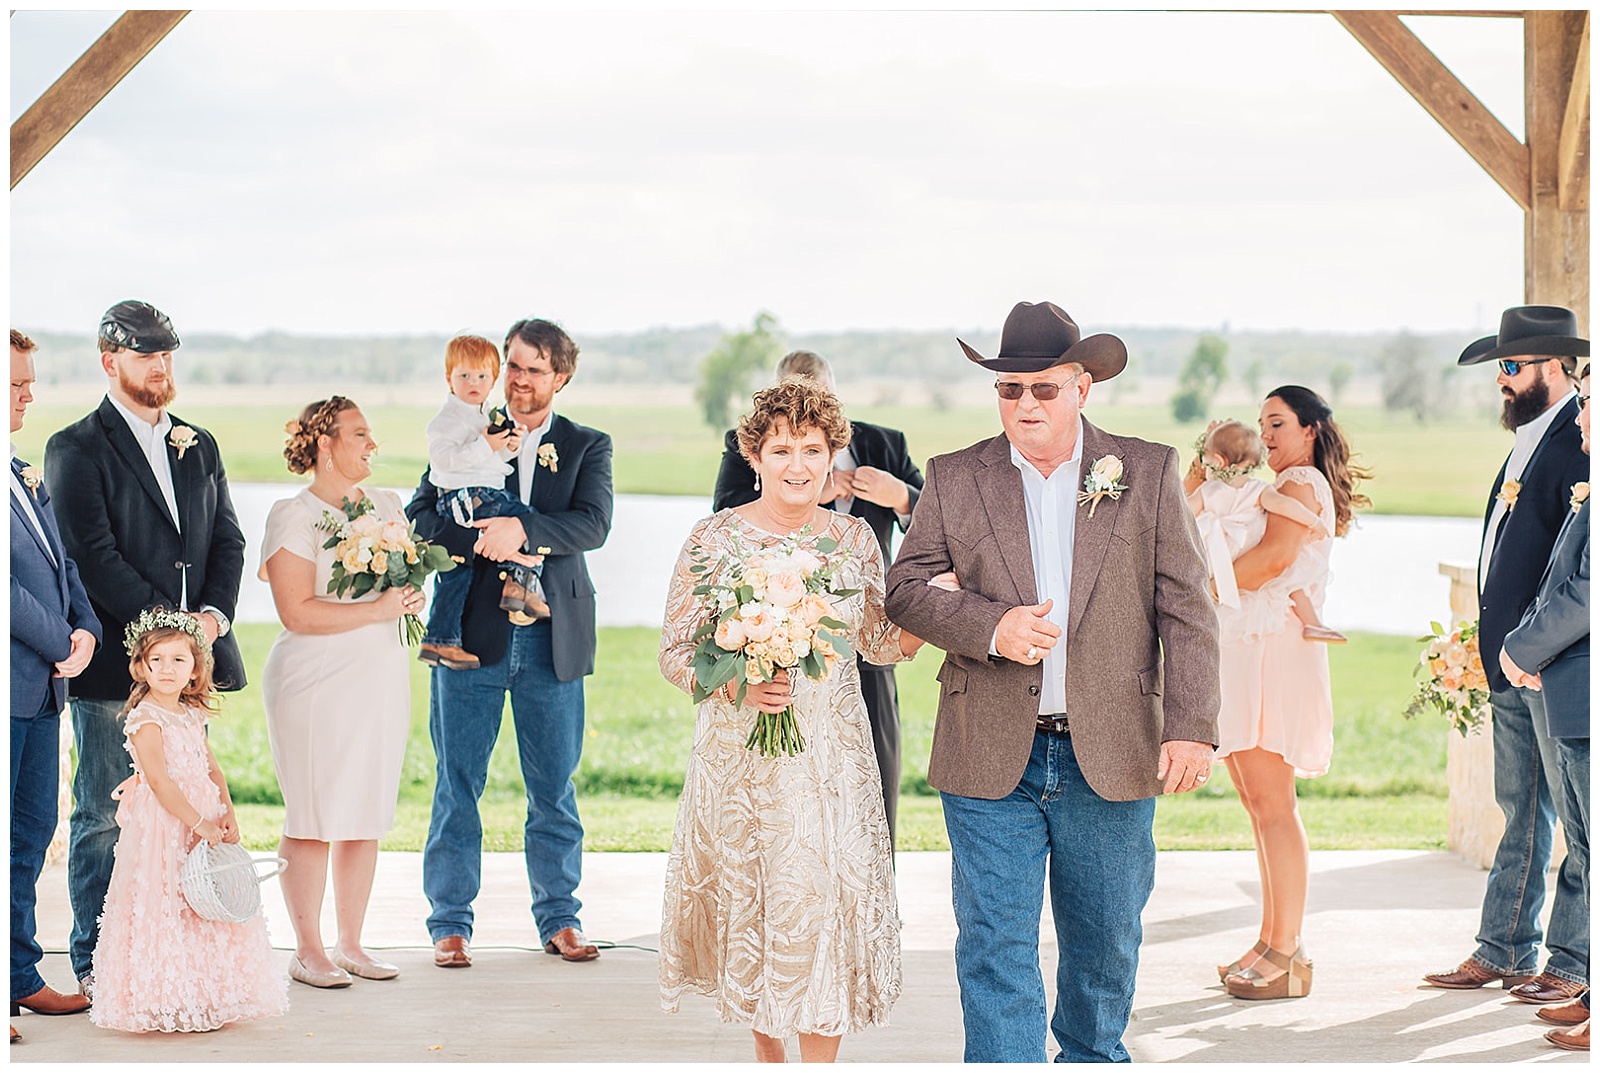 Just Married | Simple organic peach at Houston's Winery Wedding Venue